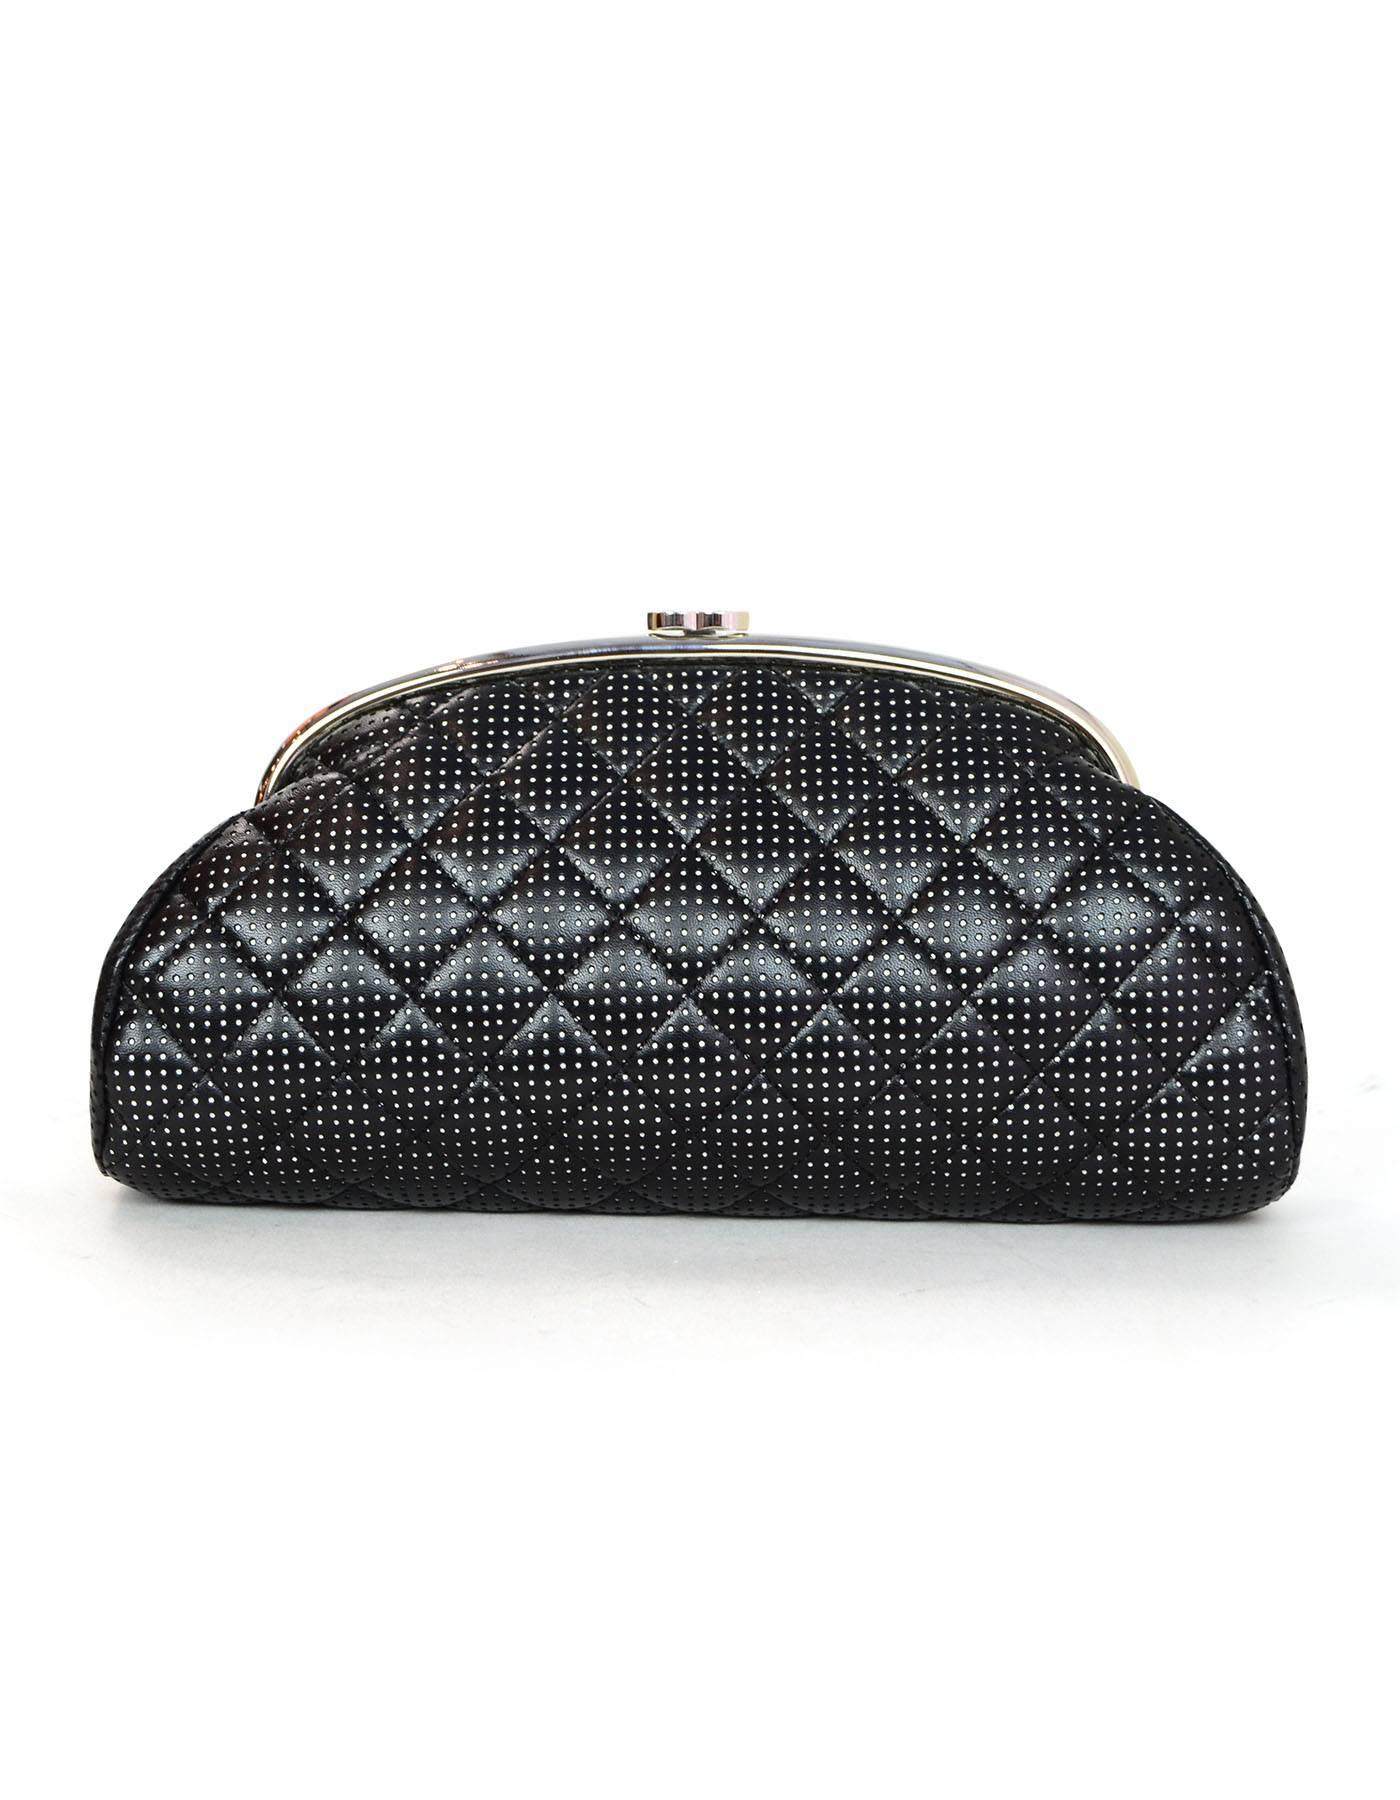 Chanel Black & White Quilted Perforated Leather Timeless Clutch Bag